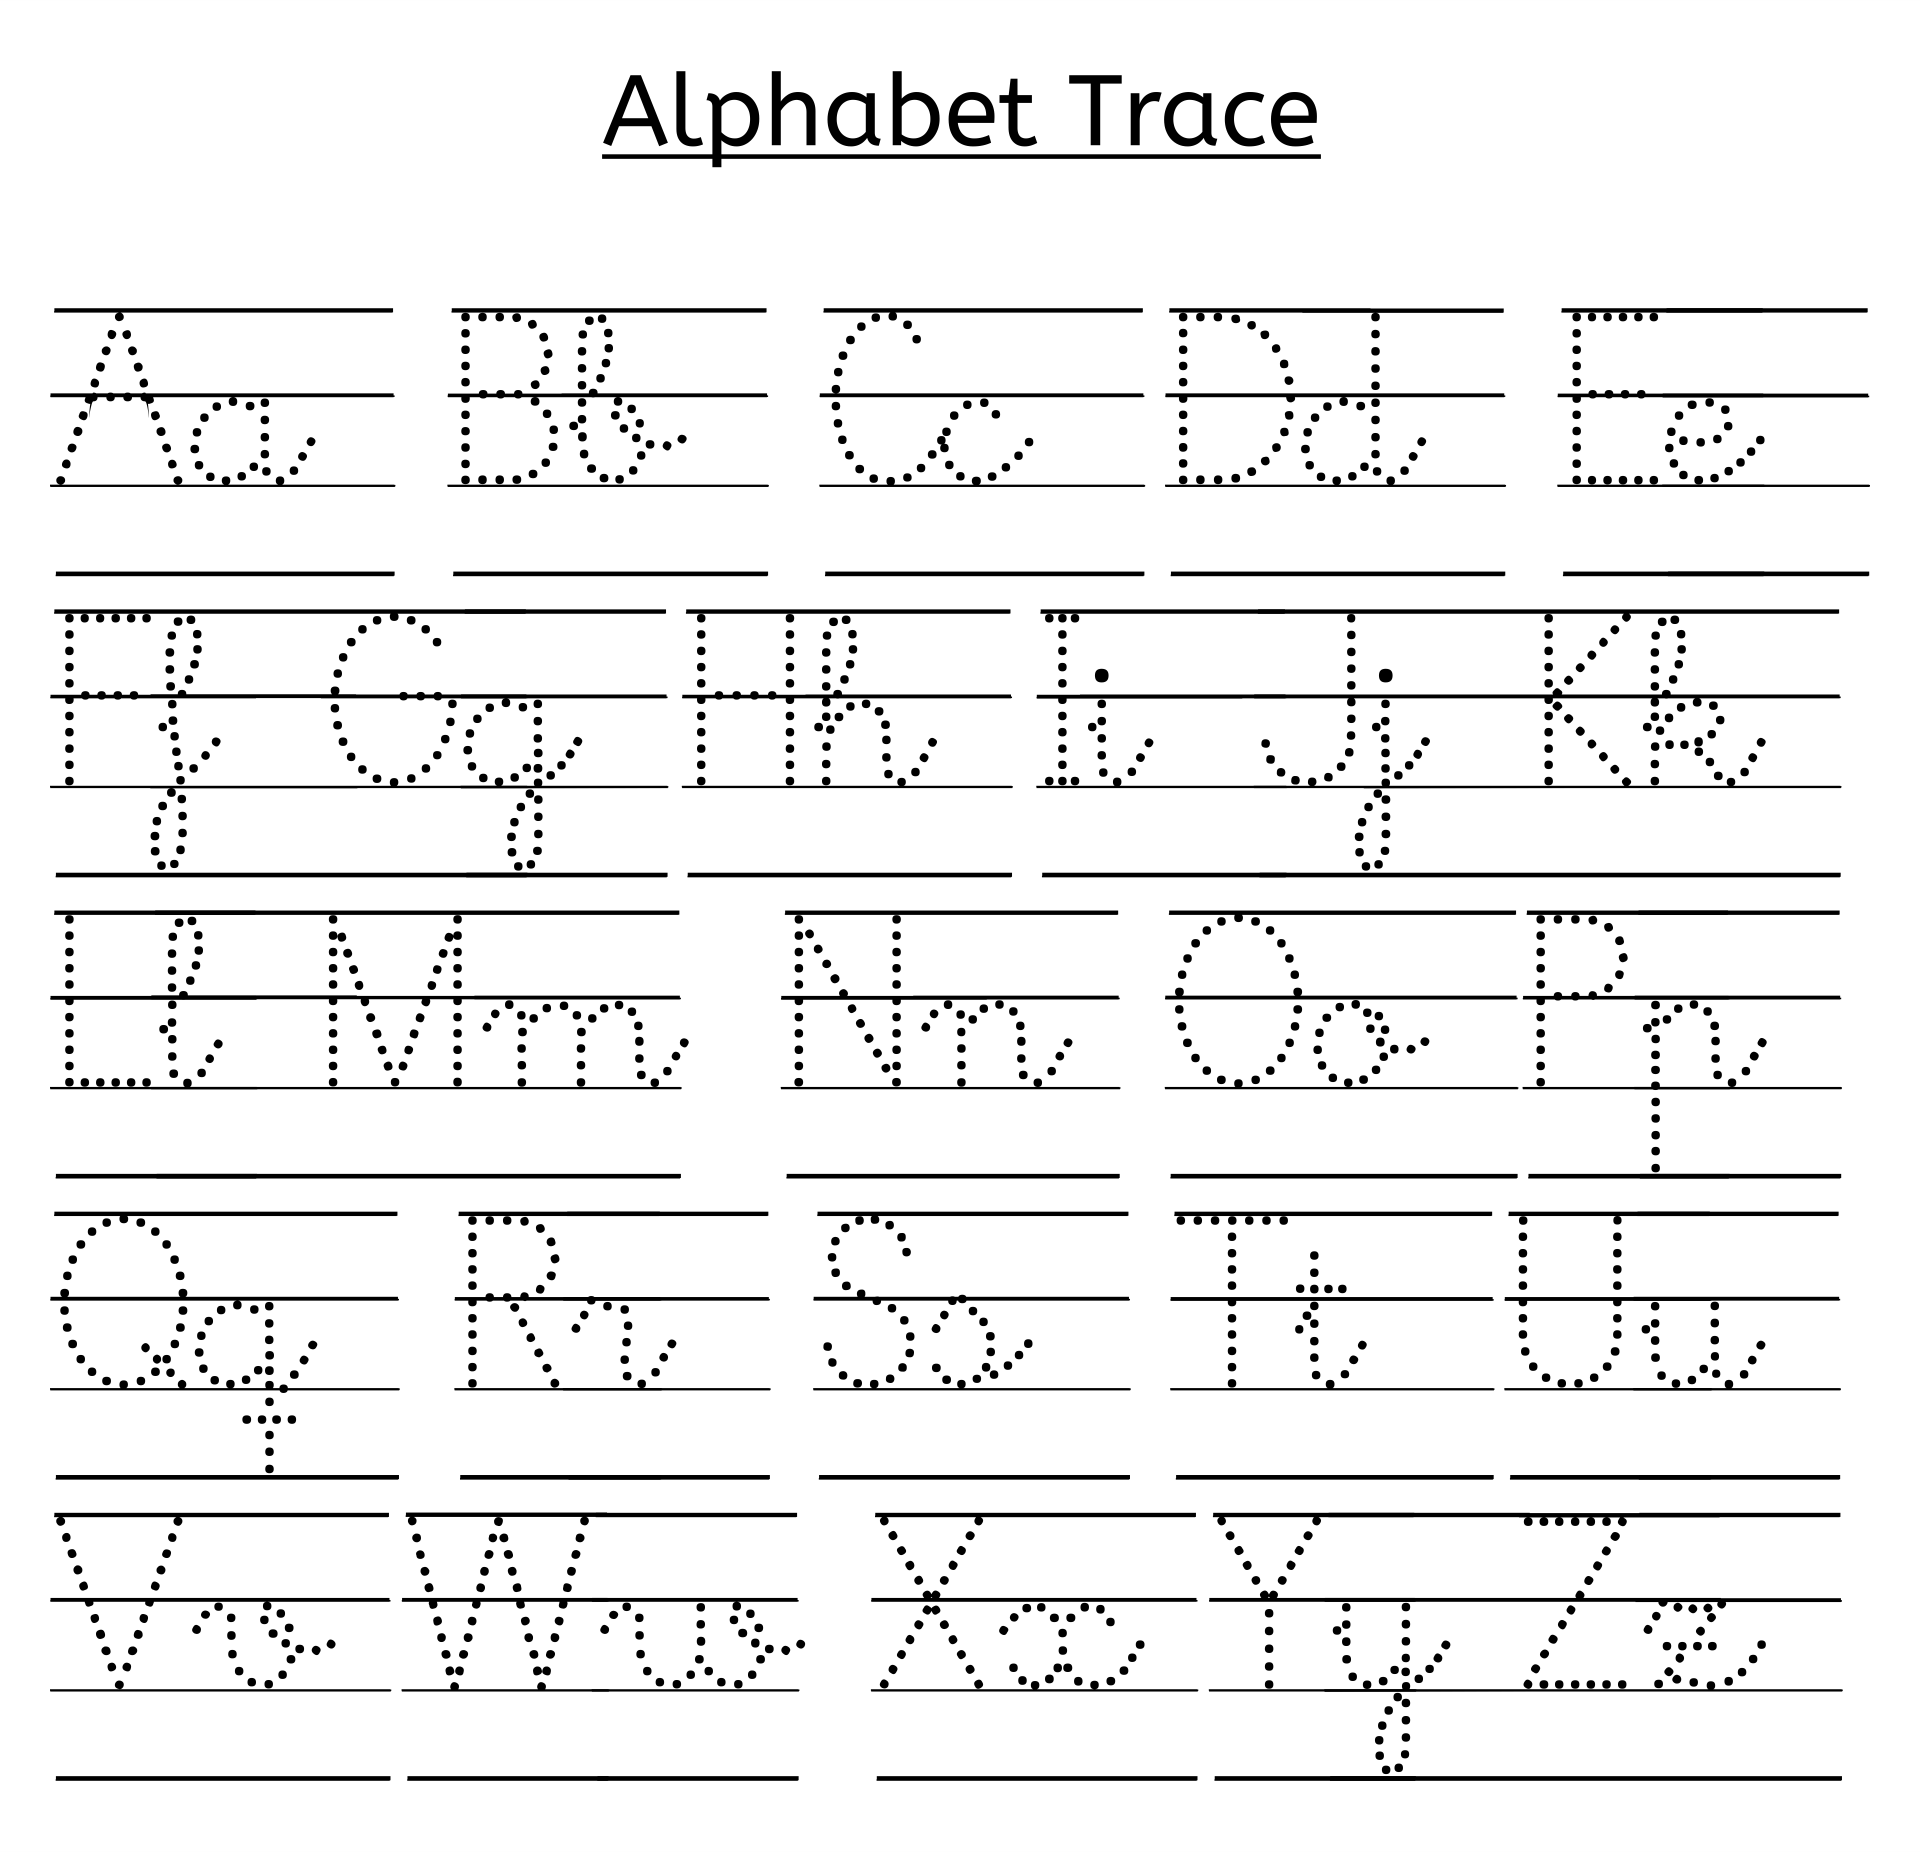 traceable-letters-printable-customize-and-print